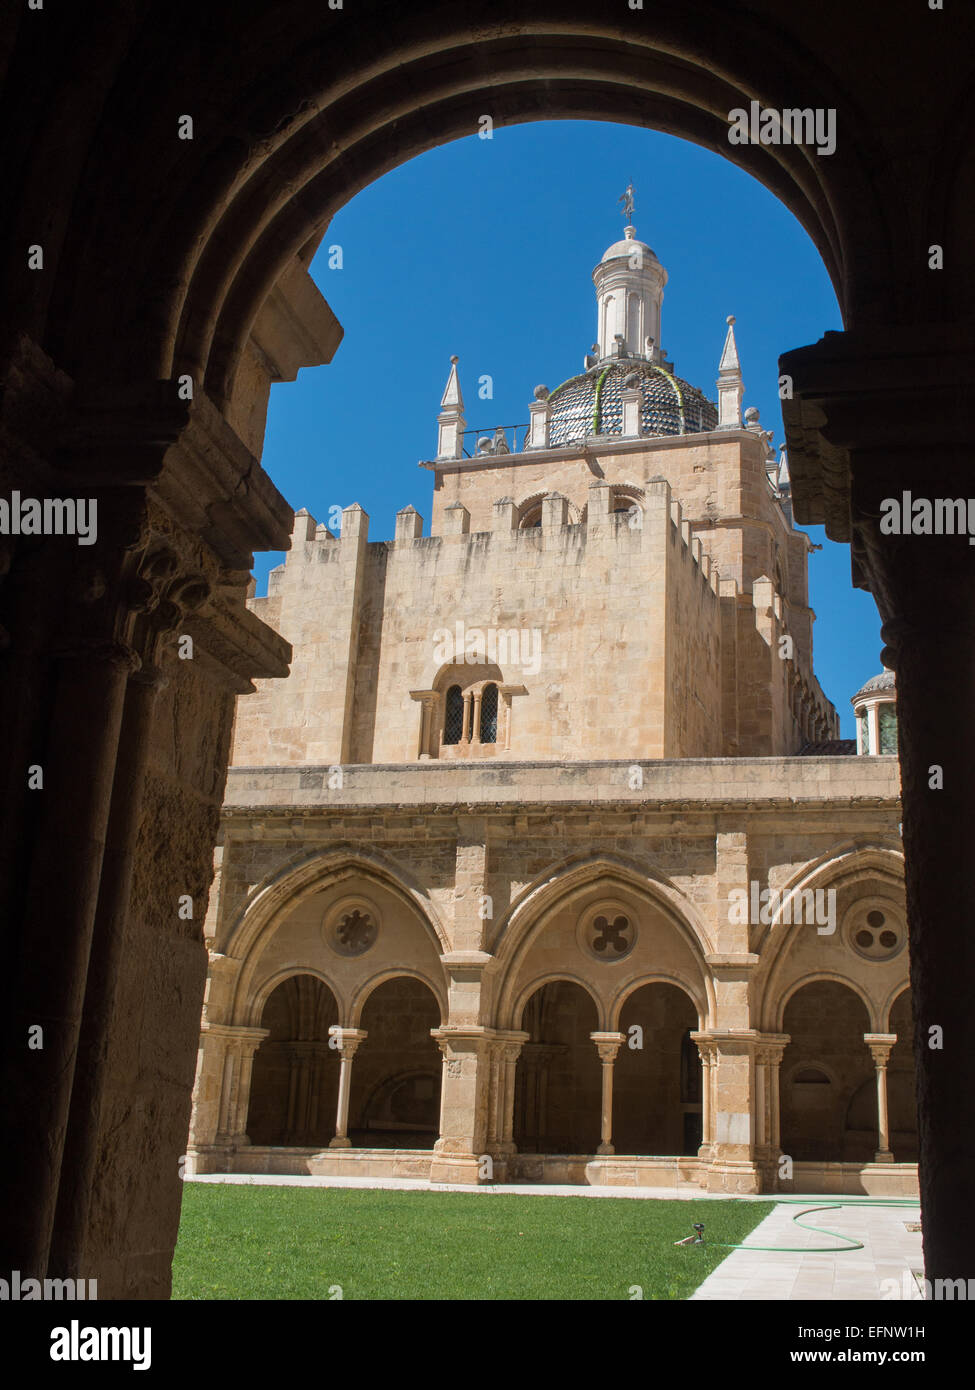 Cloister of Coimbra Old Cathdral Stock Photo